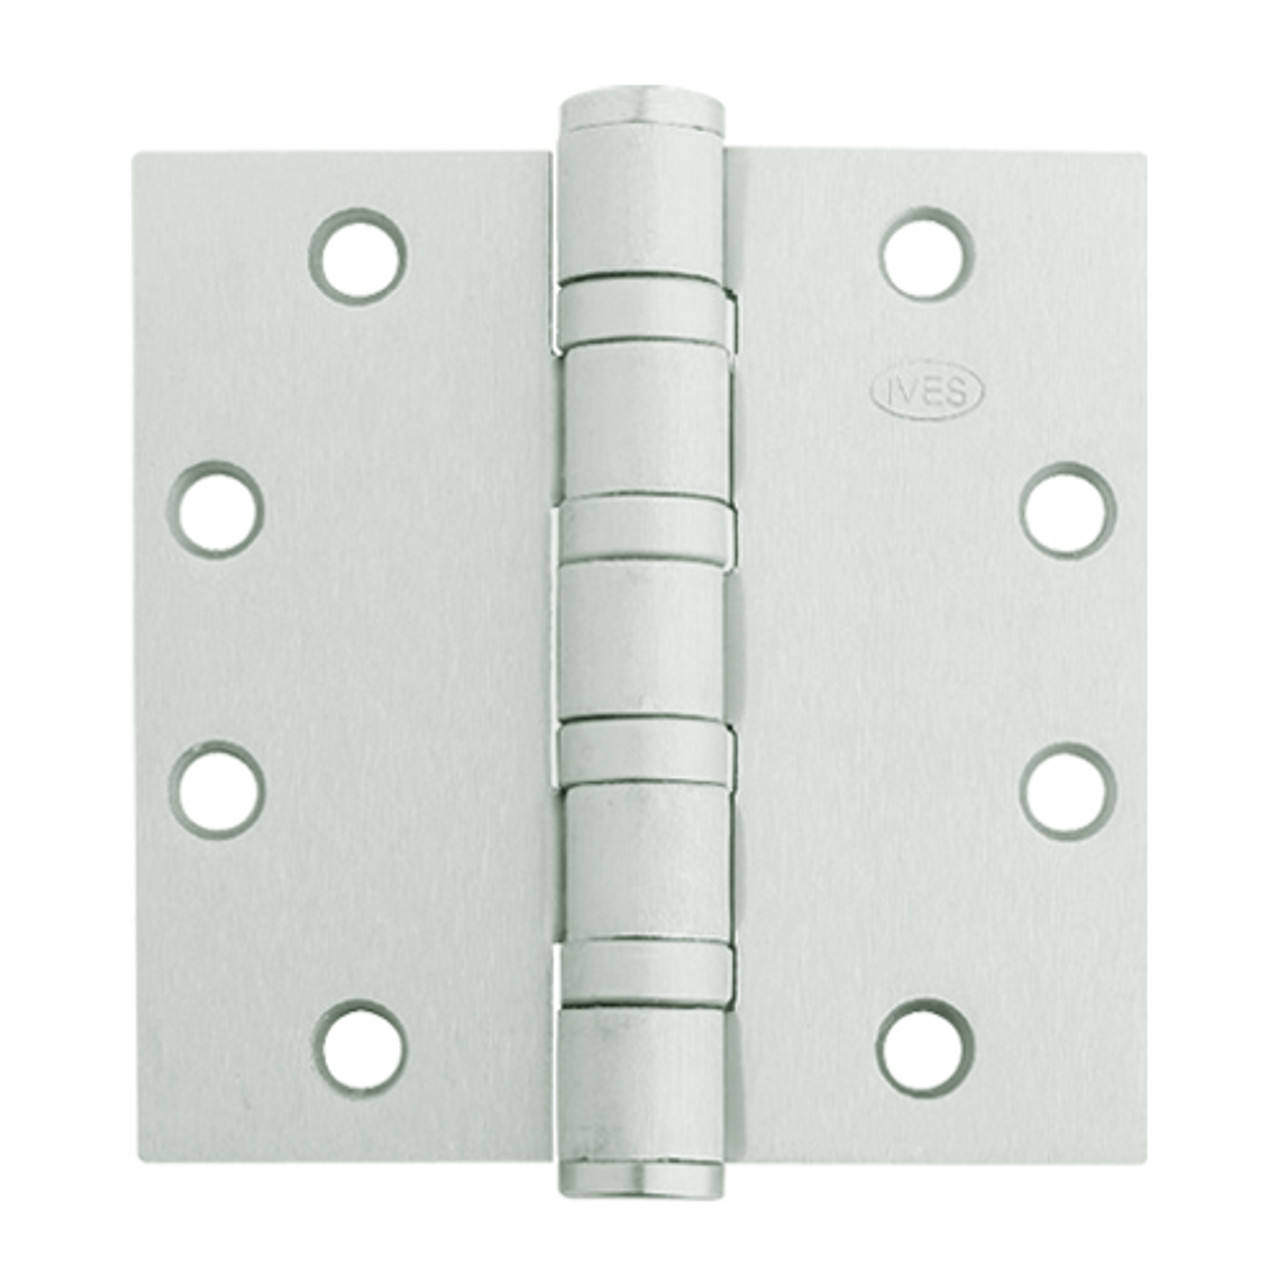 5BB1HW-5x4-5-619-TW8 IVES 5 Knuckle Ball Bearing Full Mortise Hinge with Electric Thru-Wire in Satin Nickel